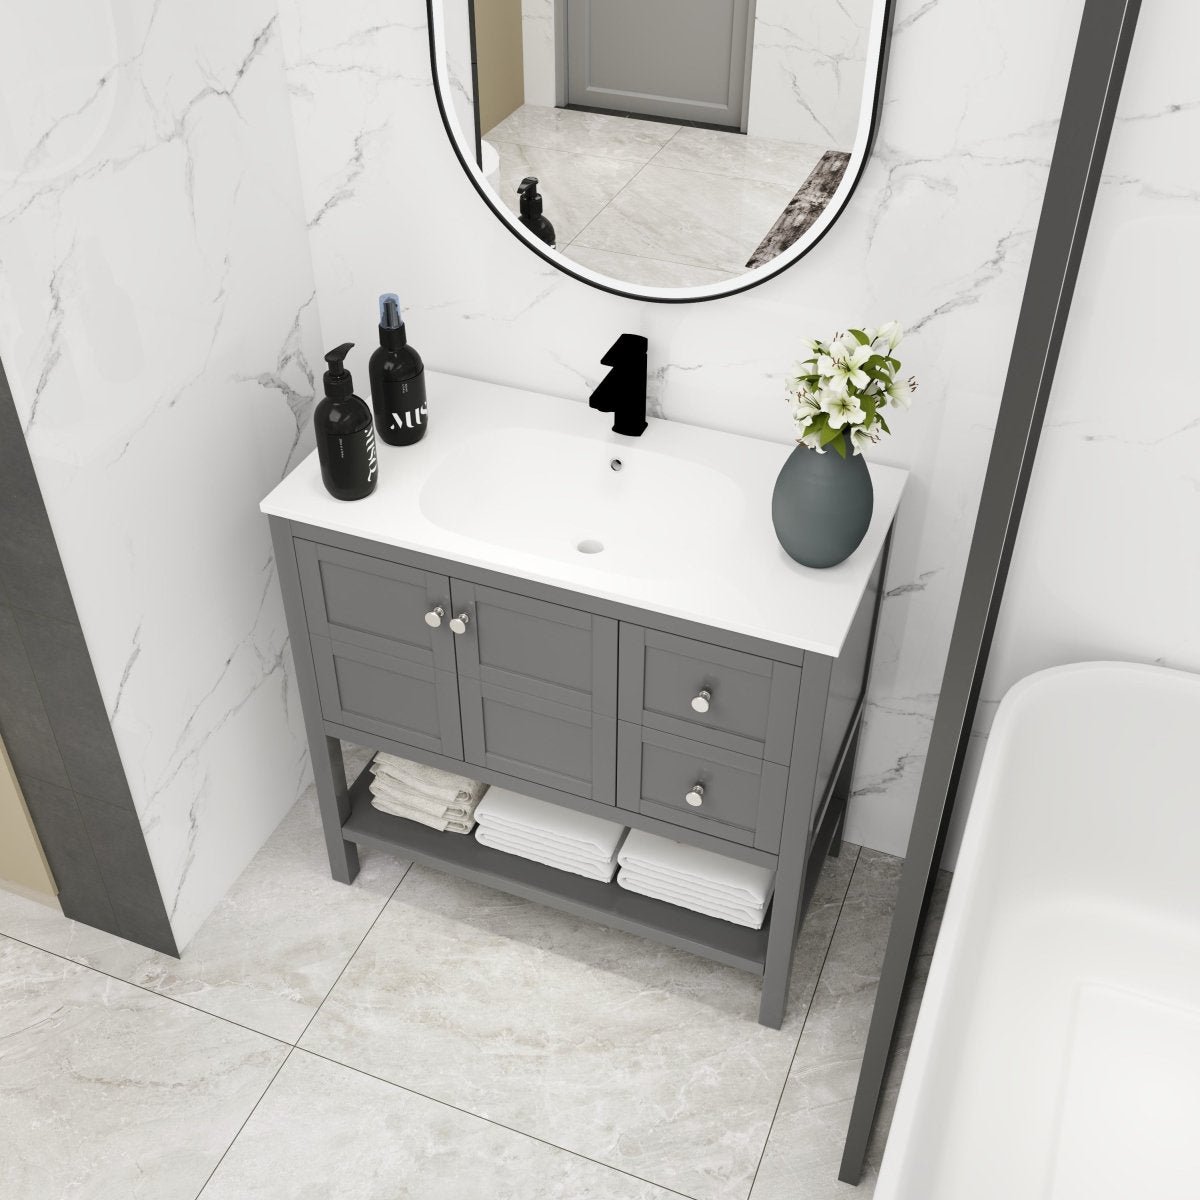 ExBrite 36x18 Bathroom Vanity With Soft Close Drawers And Gel Basin